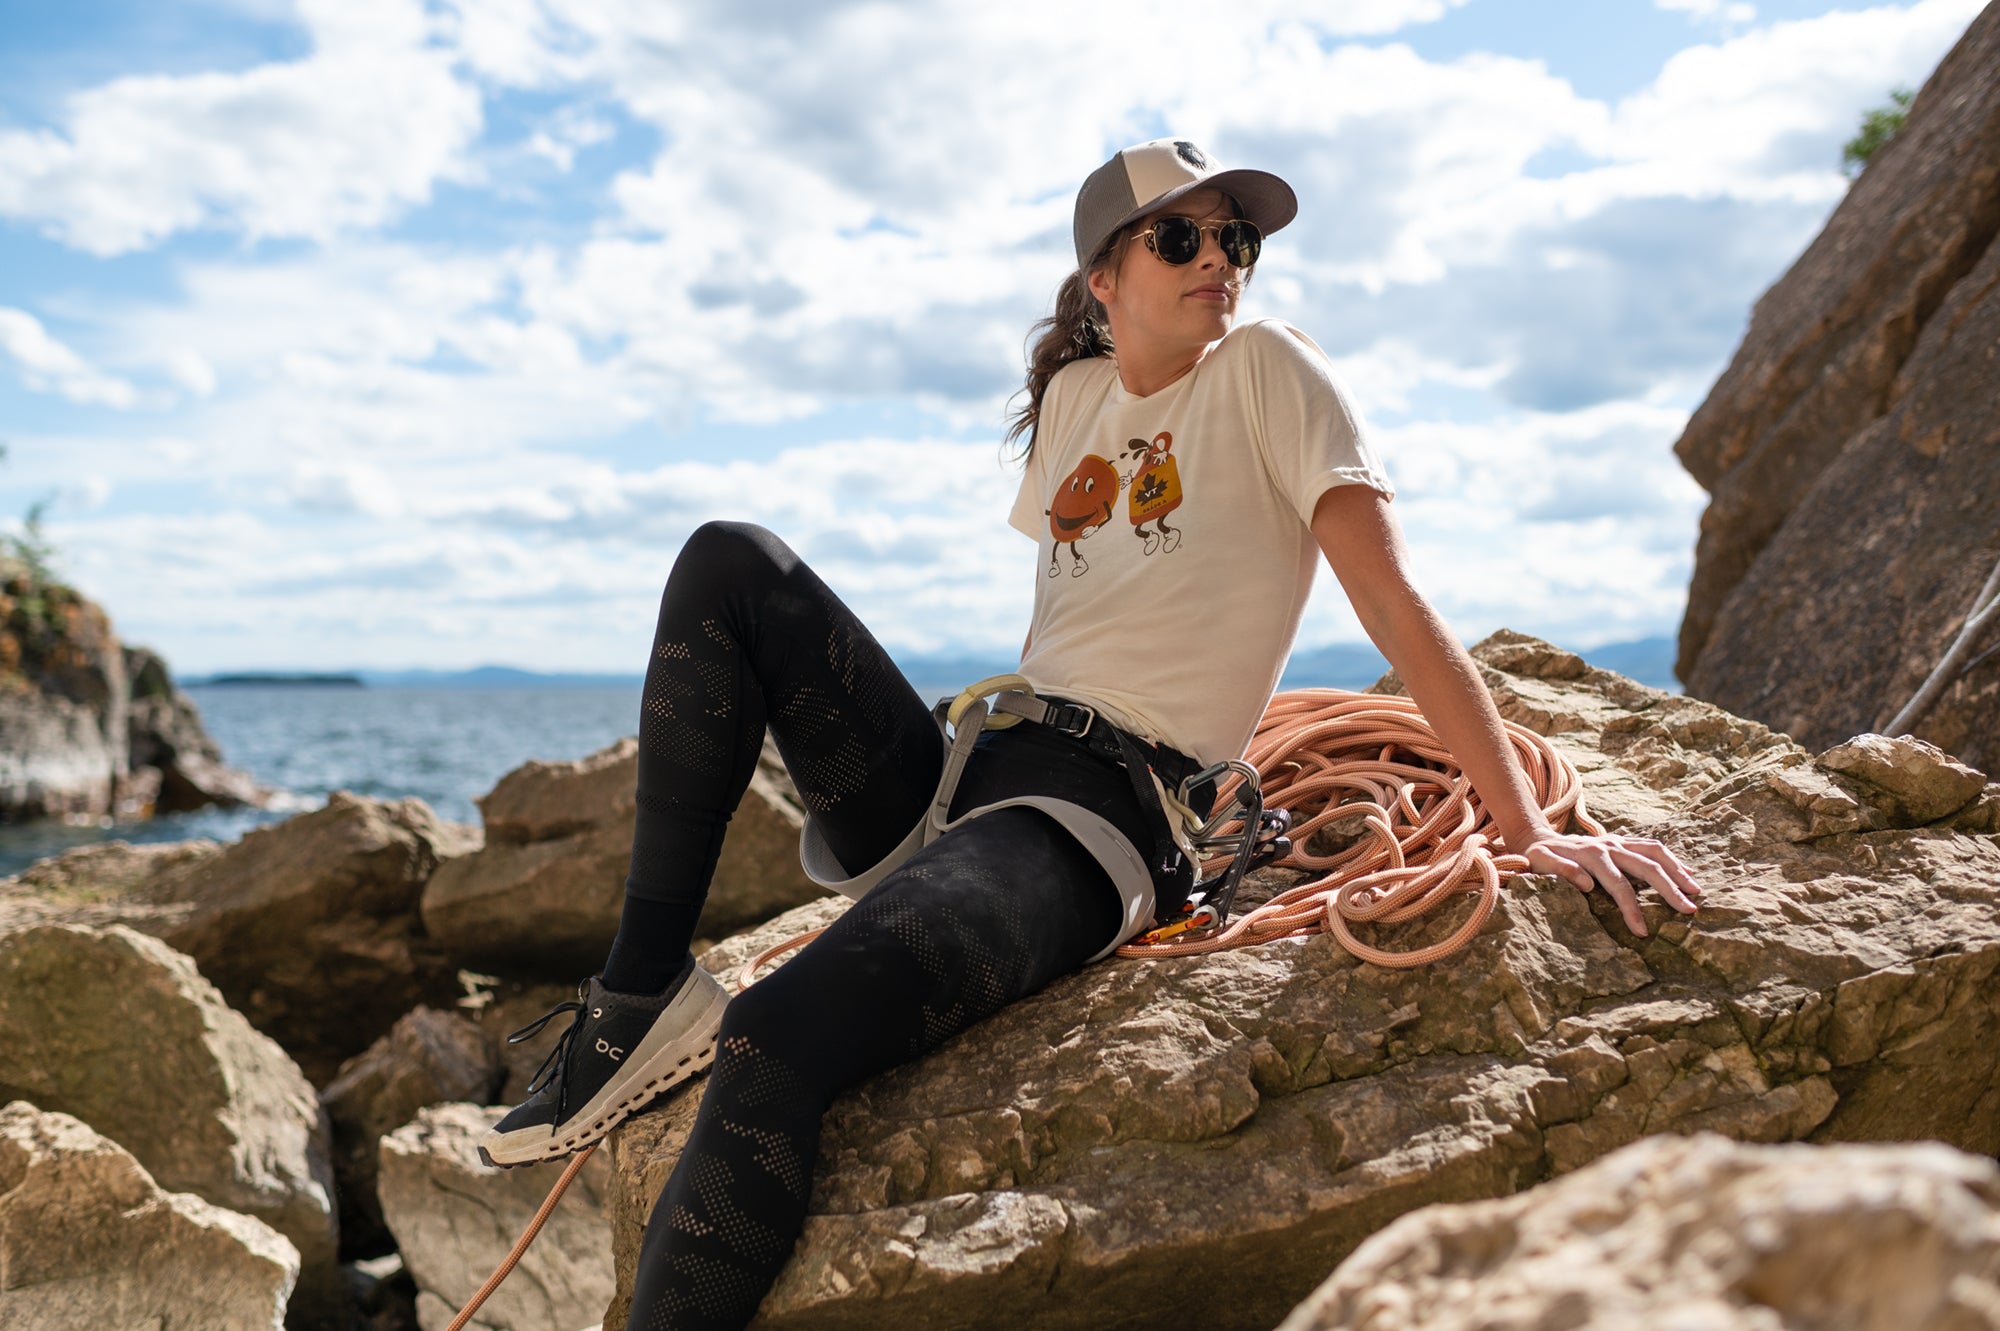 Woman sitting on rocks with climbing gear, wearing a Vermont Eclectic Company trucker hat and t-shirt